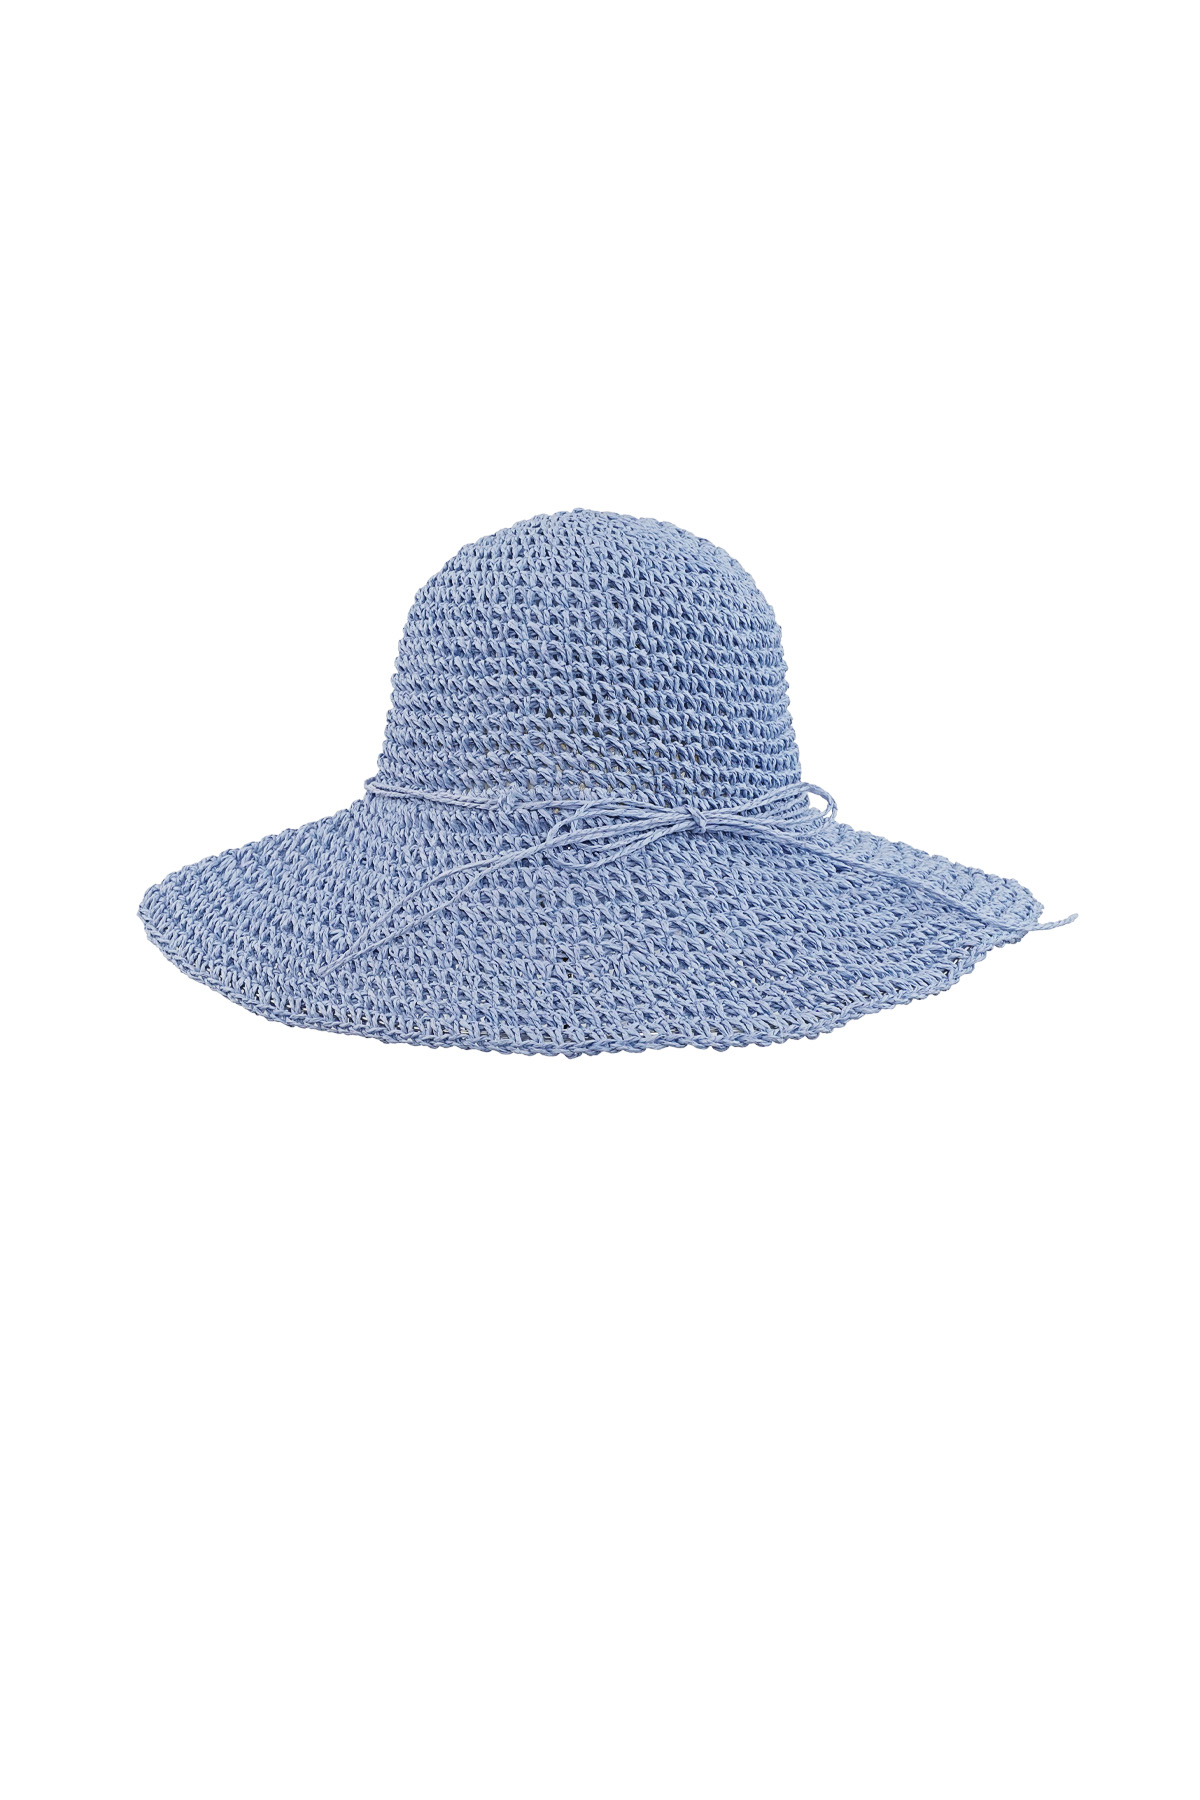 Crochet hat with bow - blue h5 